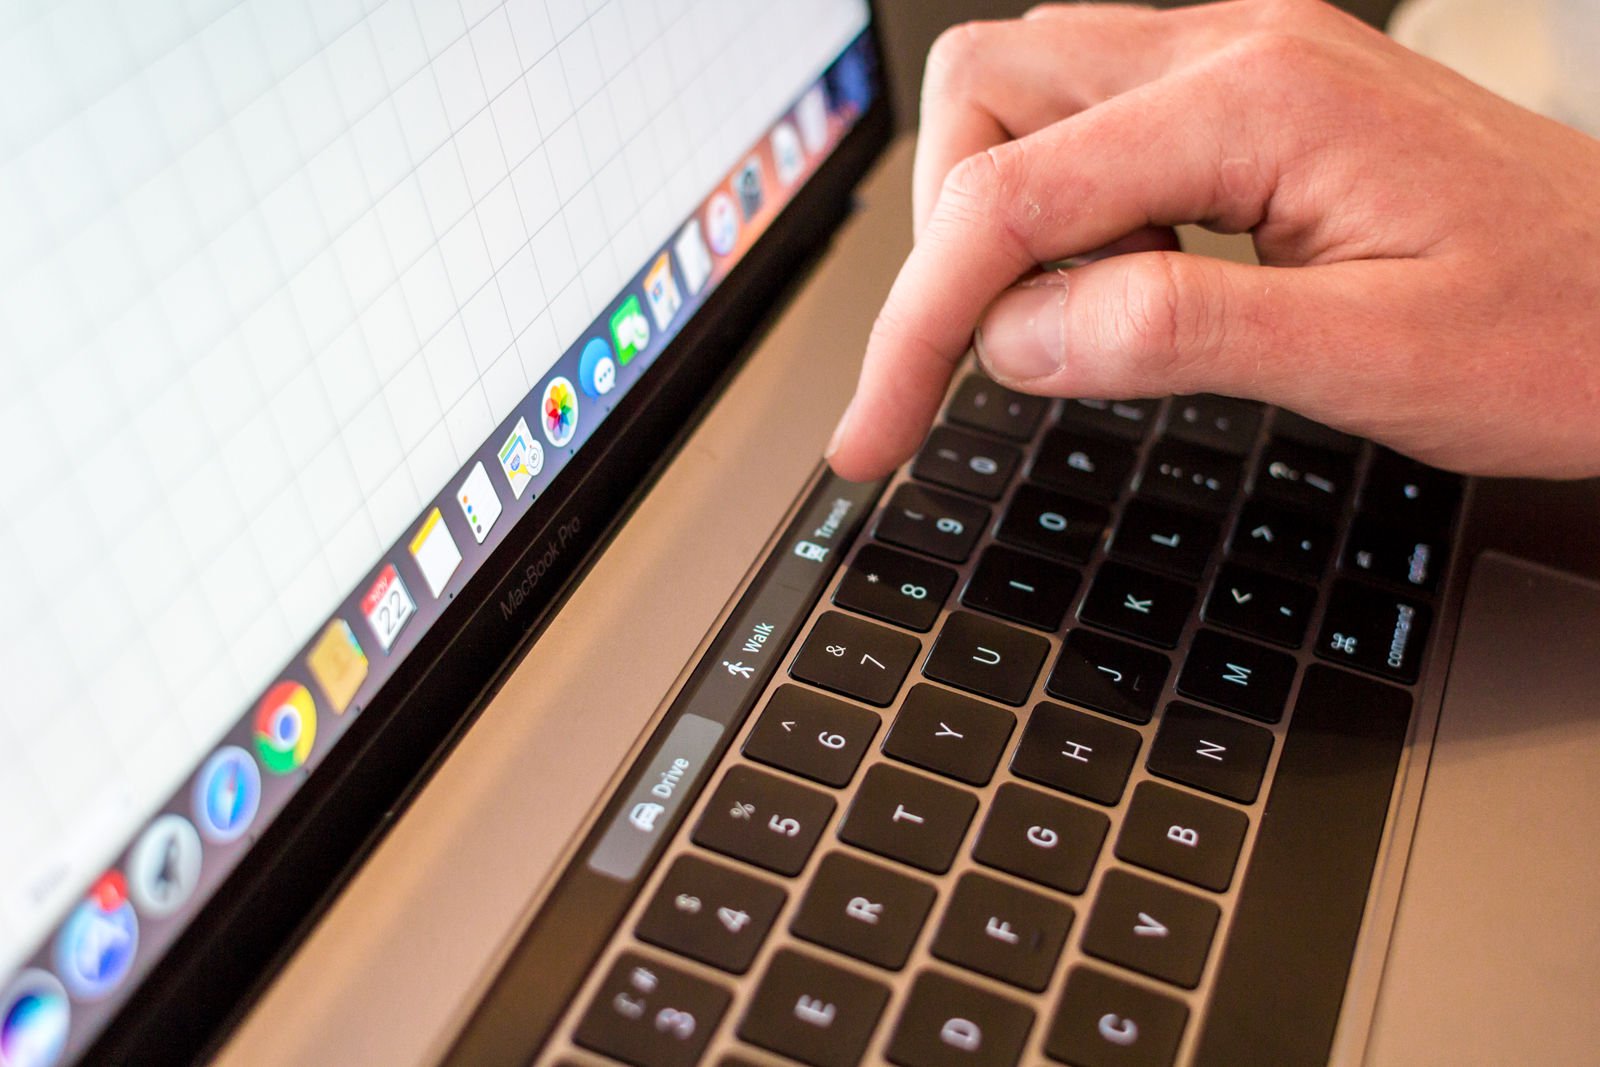 5 reasons not to buy MacBook Air: Touch Bar